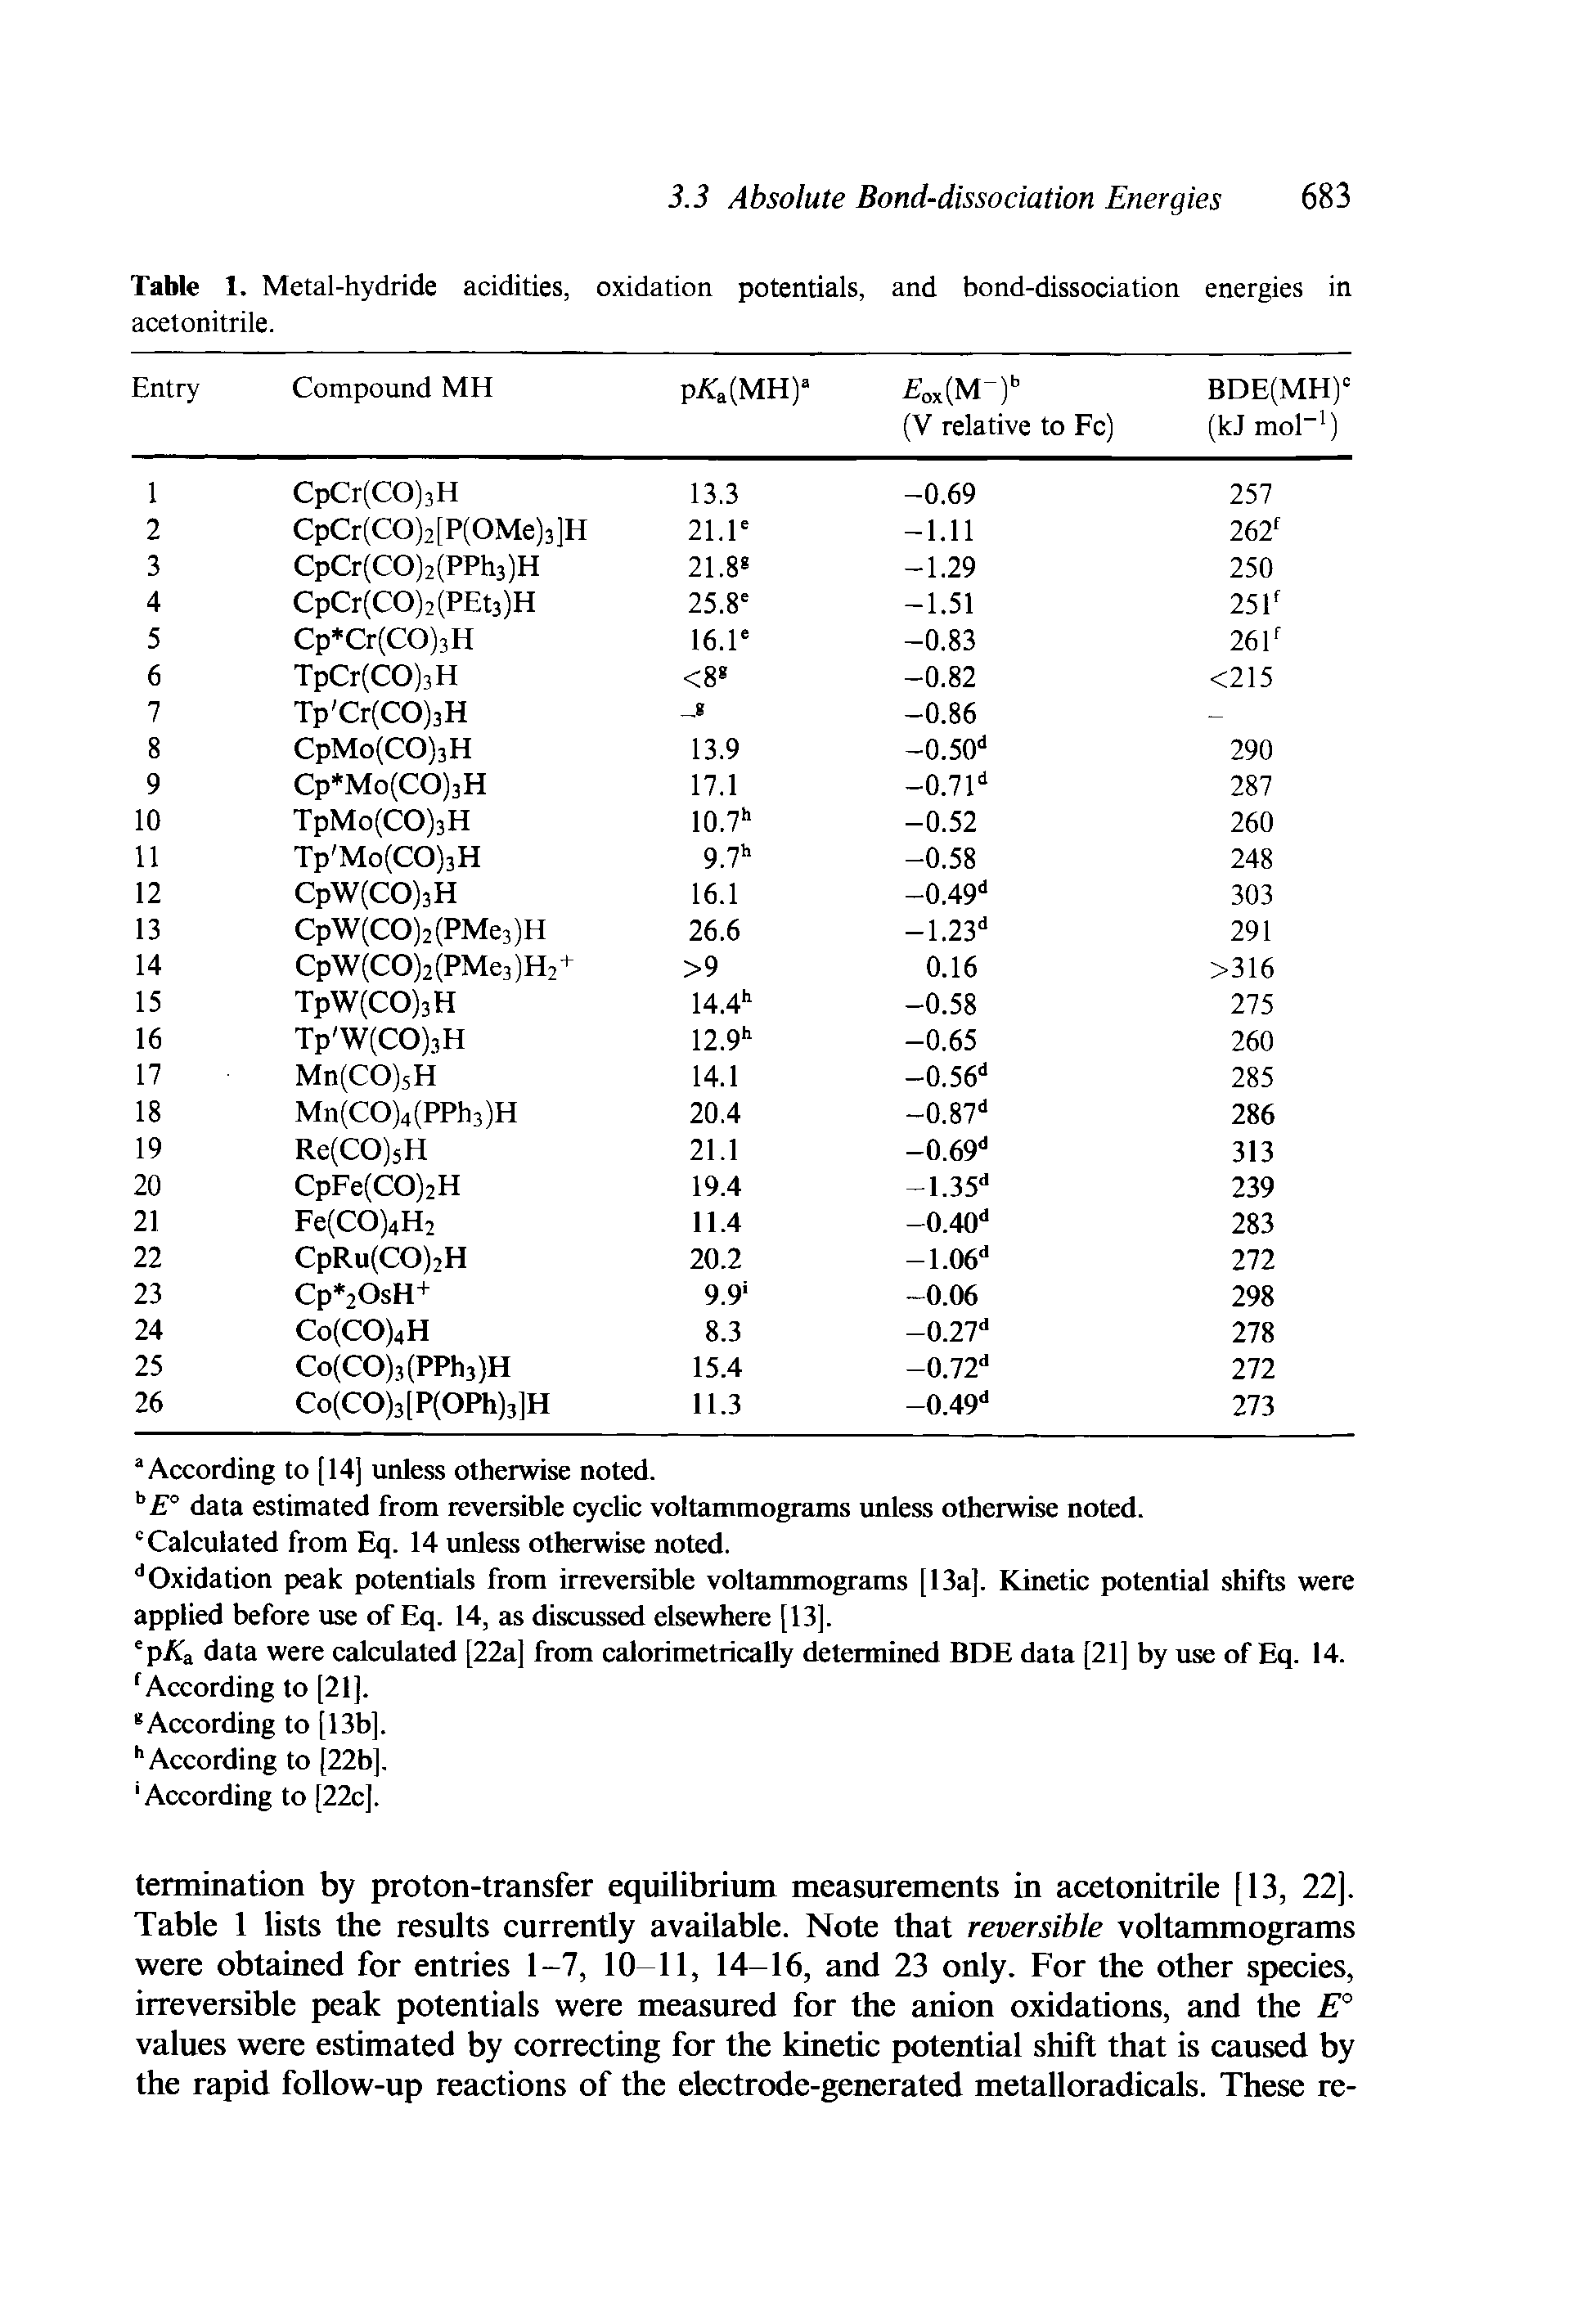 Table 1. Metal-hydride acidities, oxidation potentials, and bond-dissociation energies in acetonitrile.